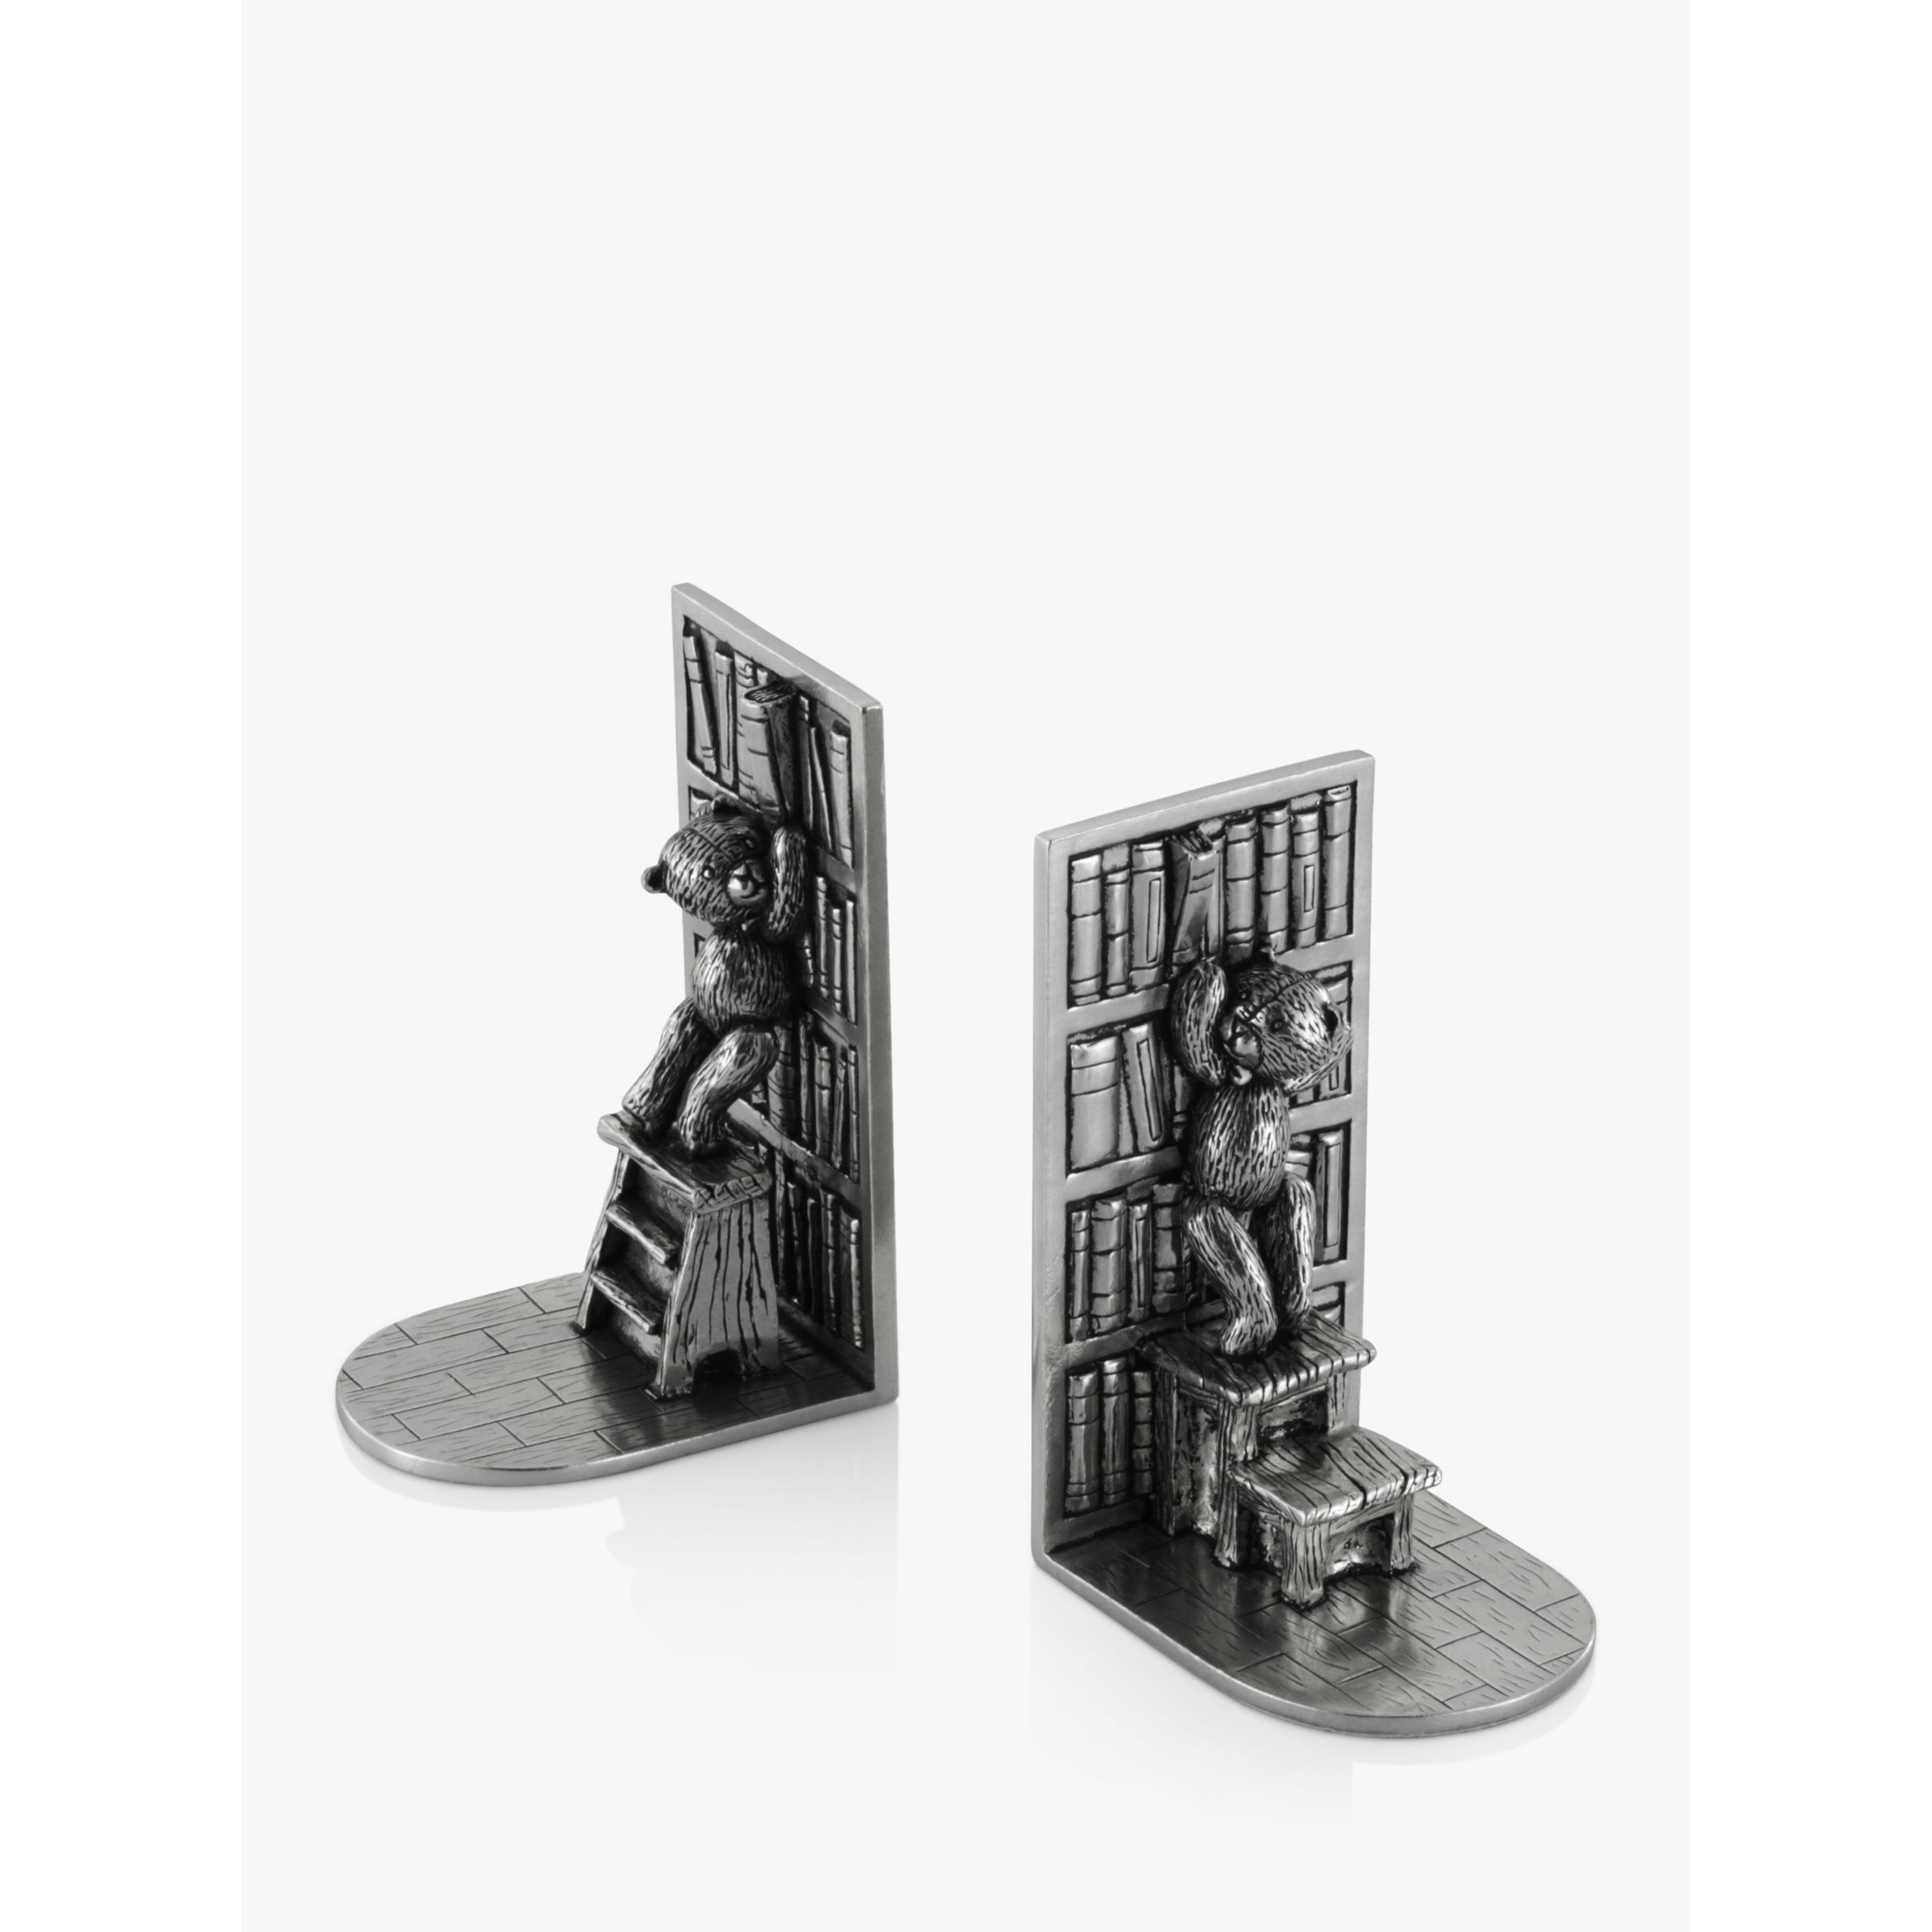 Royal Selangor Teddy Bears Picnic Pewter Bookends, Silver - image 1